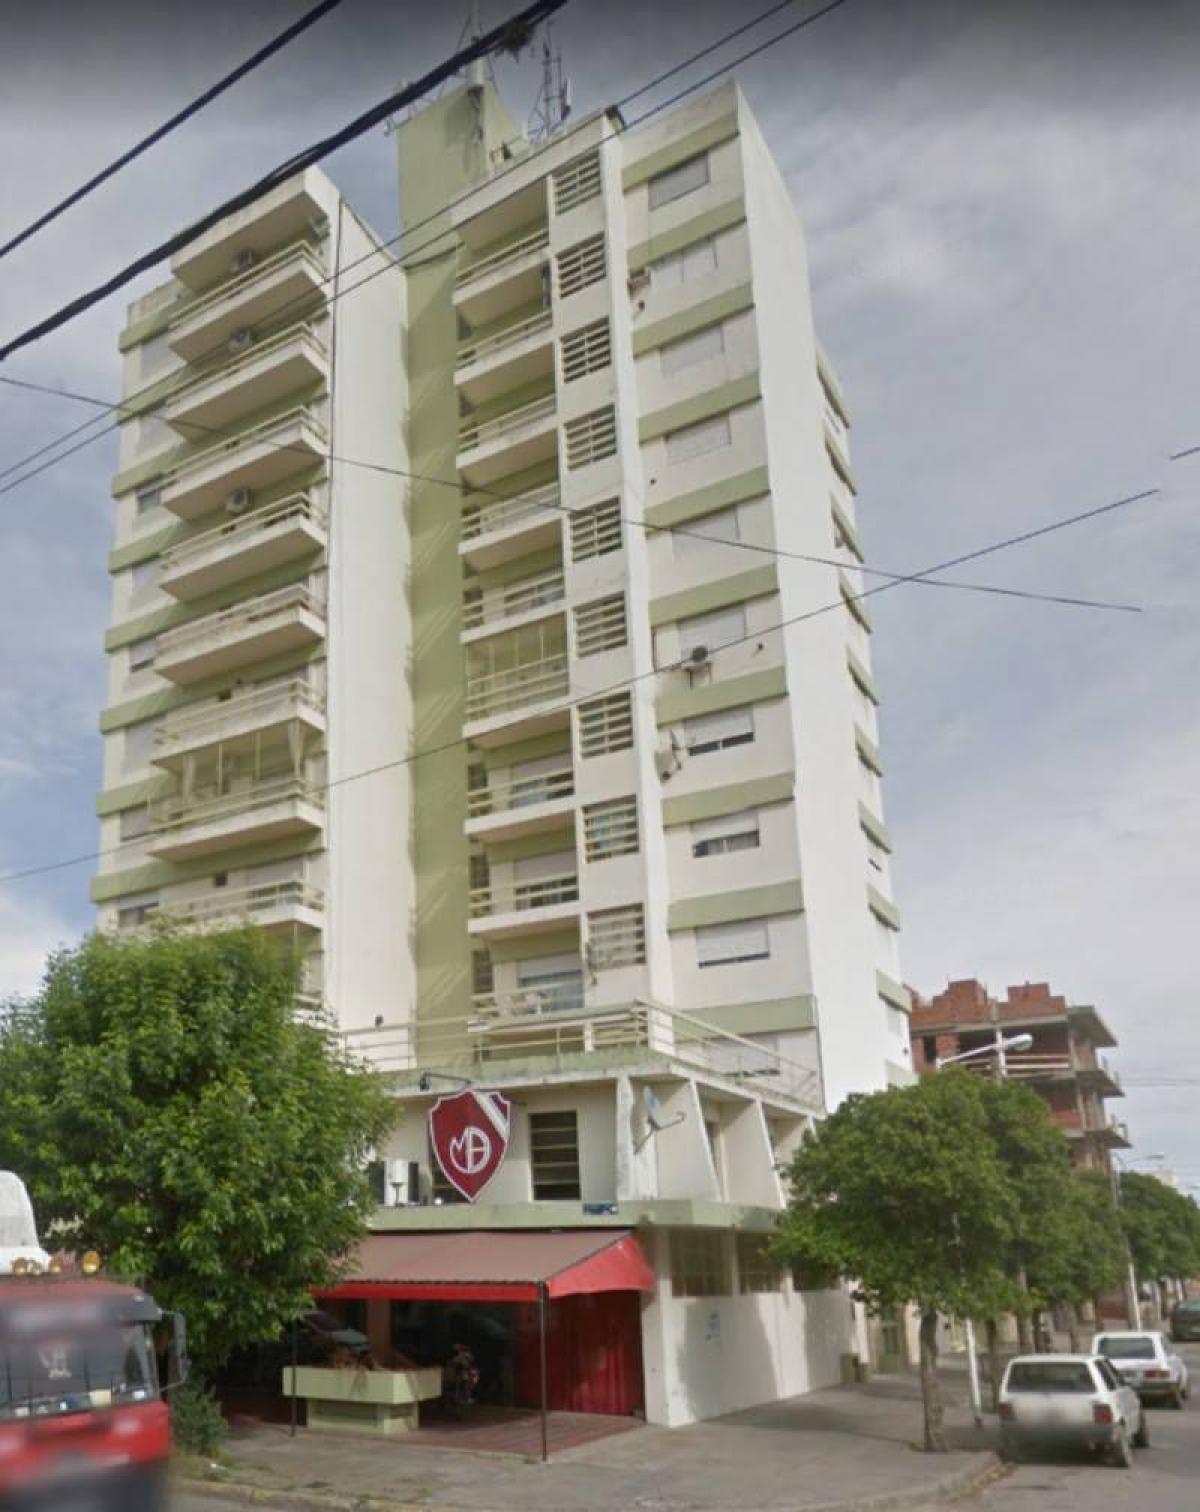 Picture of Apartment For Sale in San Pedro, Buenos Aires, Argentina